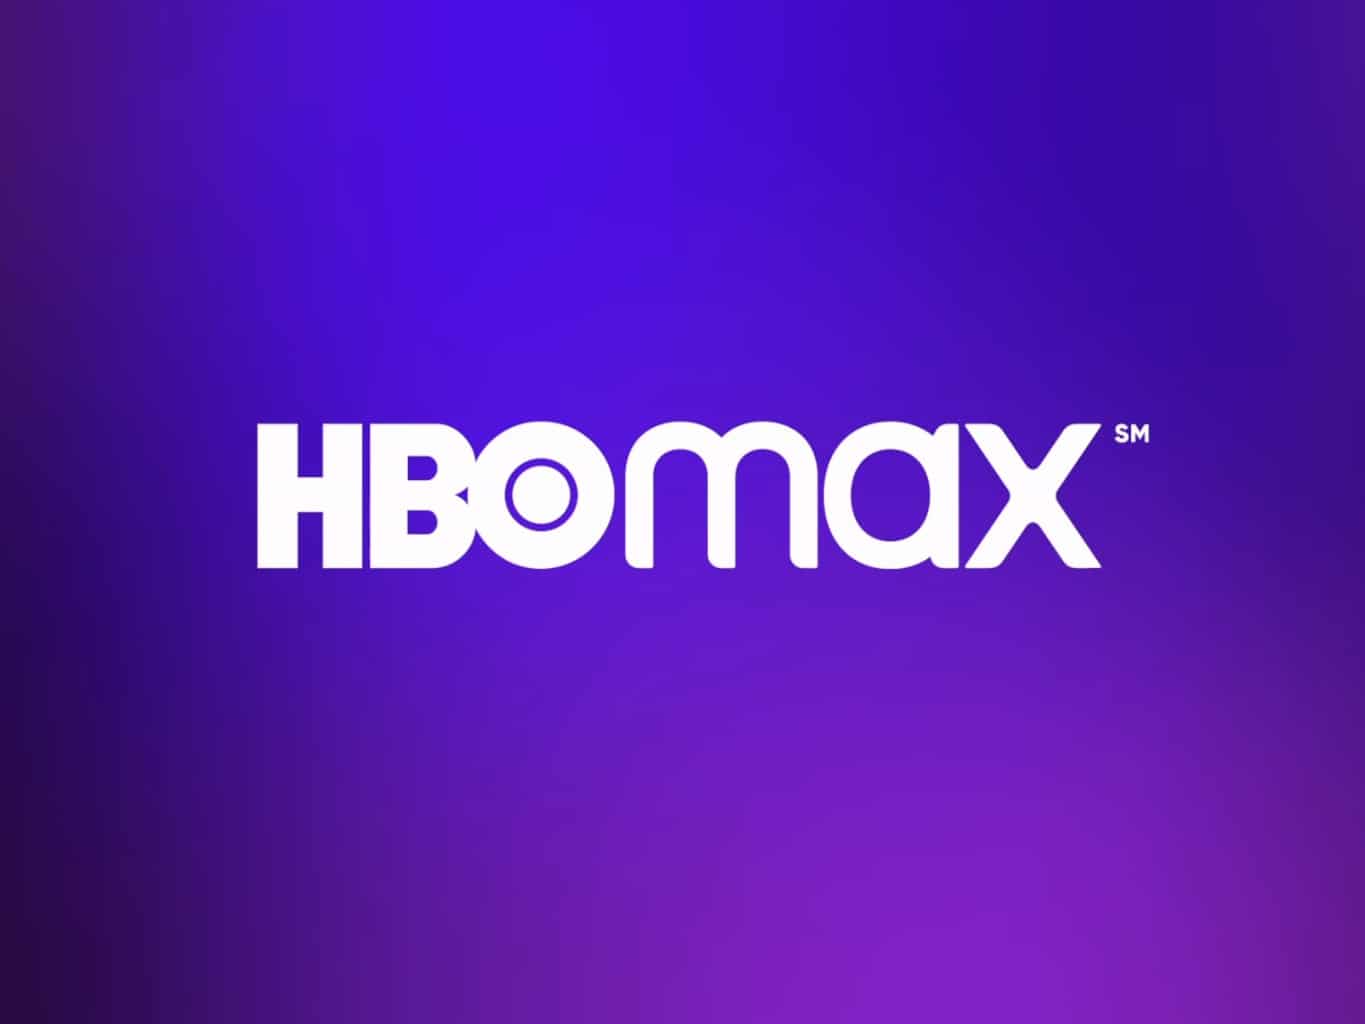 90 Great Movies and Shows to Stream on HBO Max